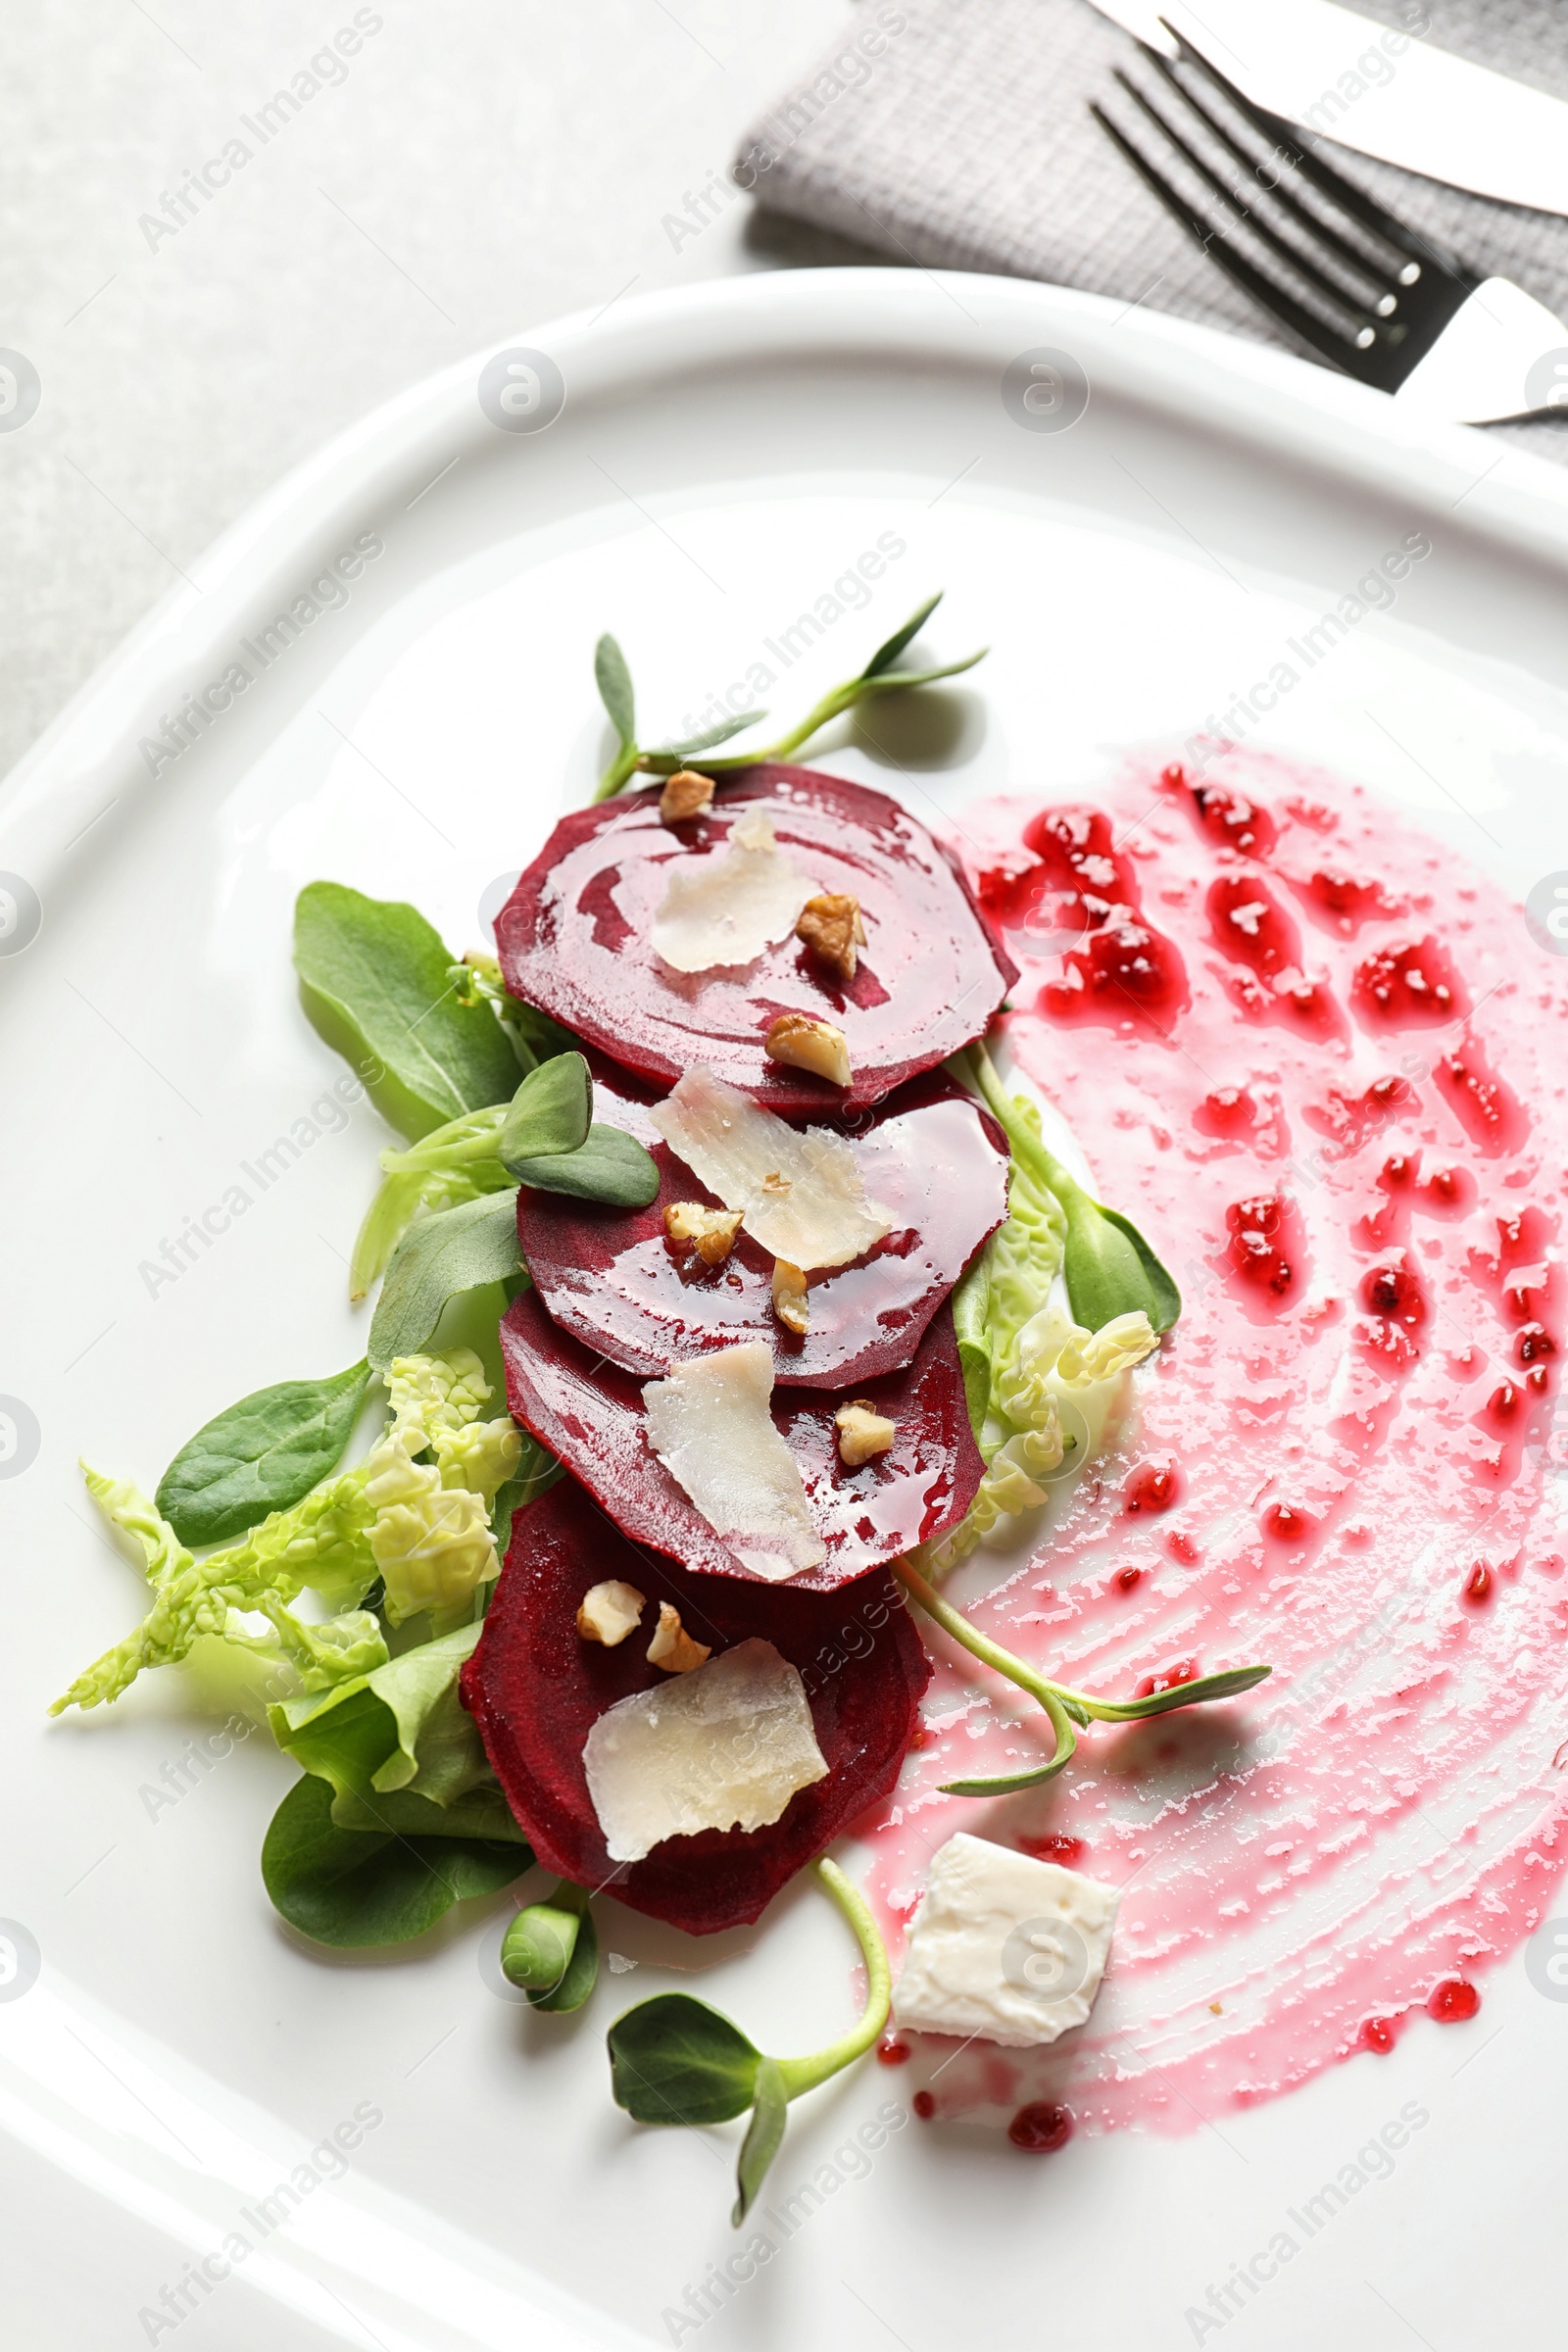 Photo of Plate with delicious beet salad served on table